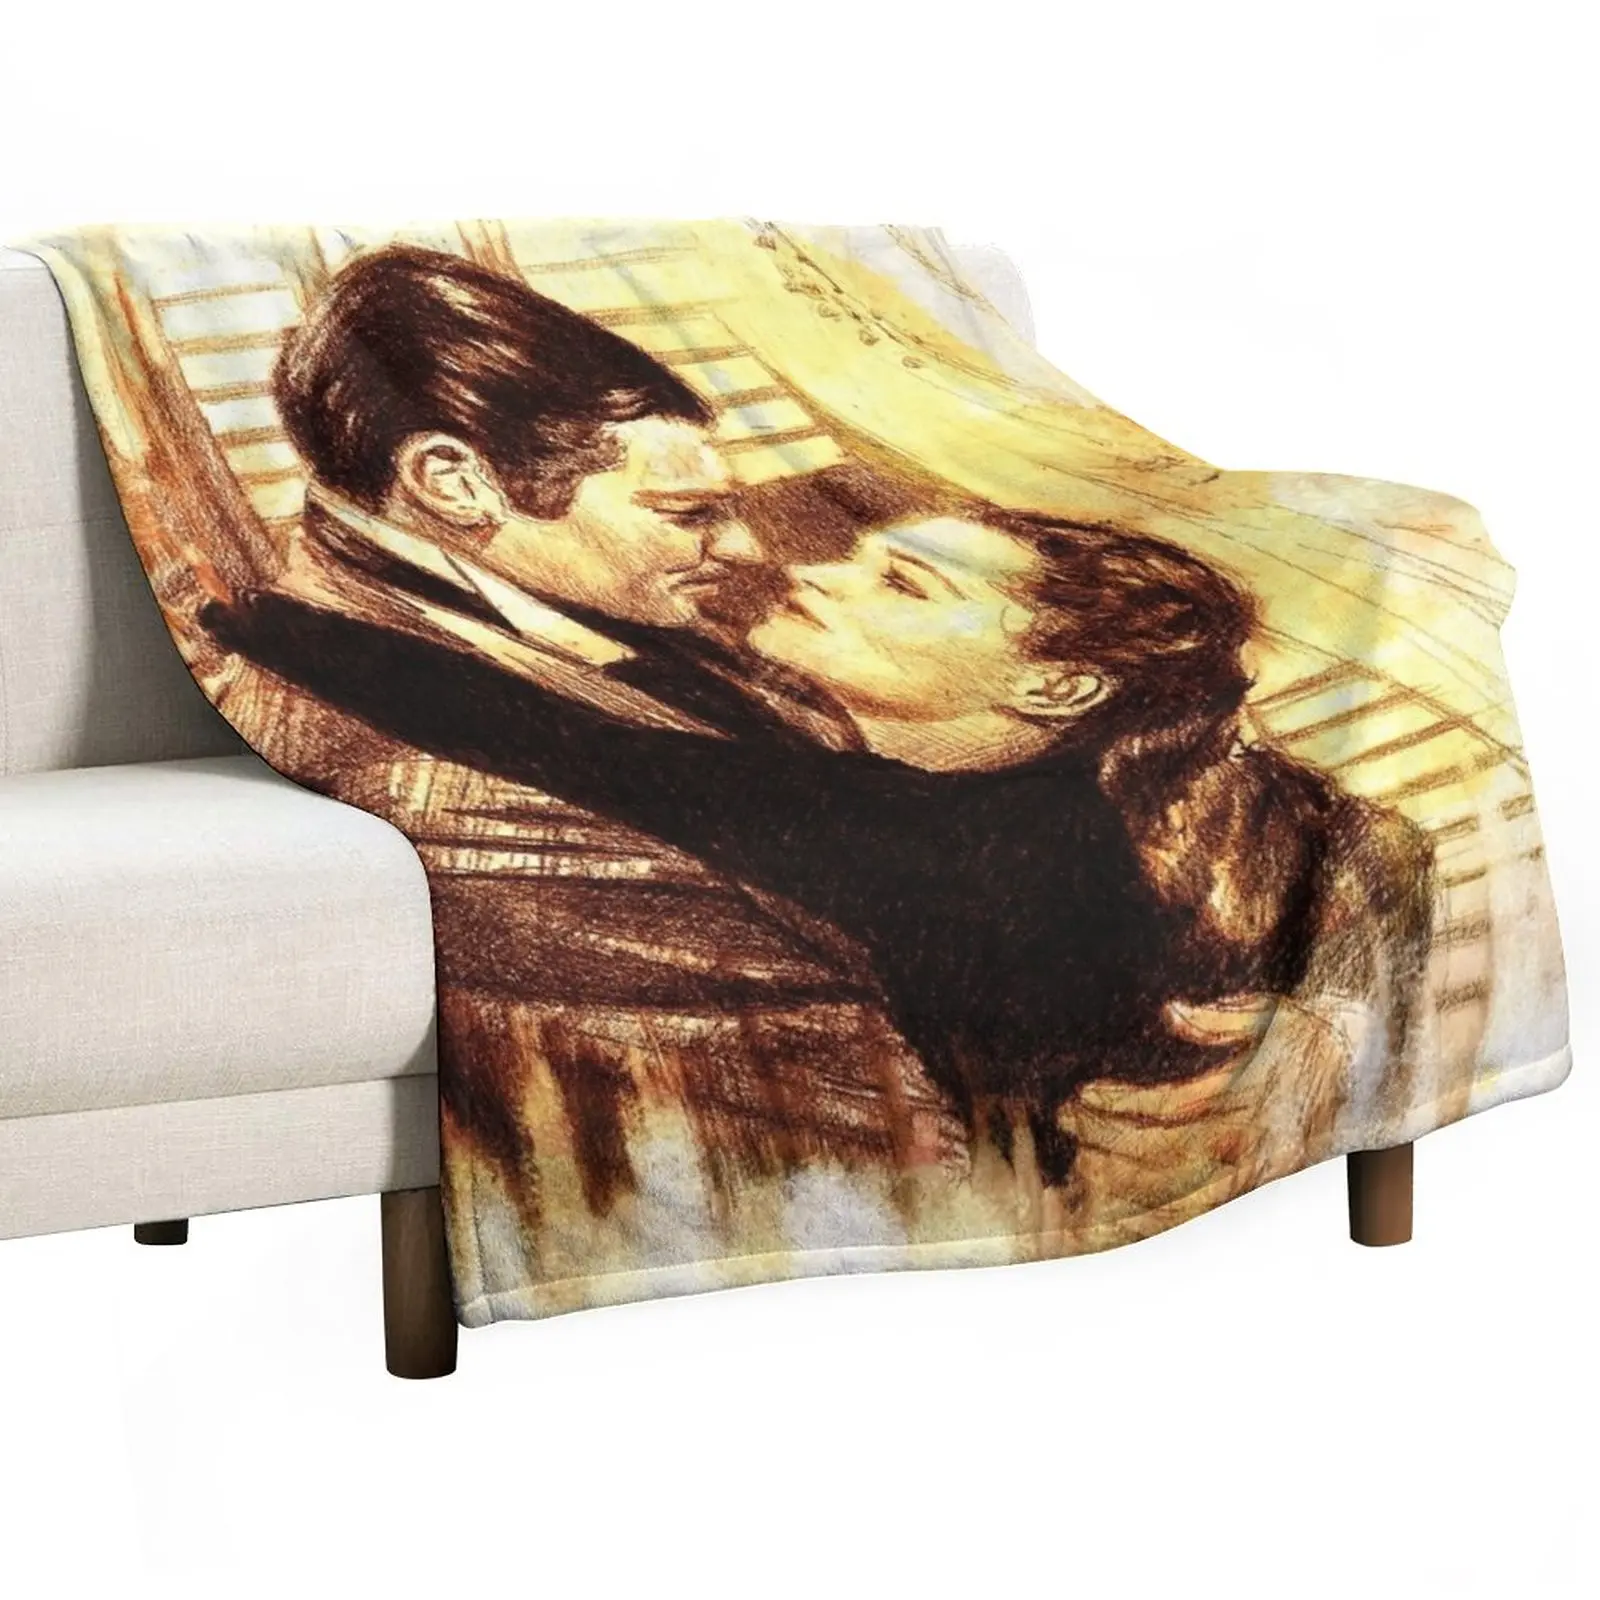 

Gone with the wind - Gone with the wind Throw Blanket blankets and throws Camping Blanket Dorm Room Essentials Thermal Blanket